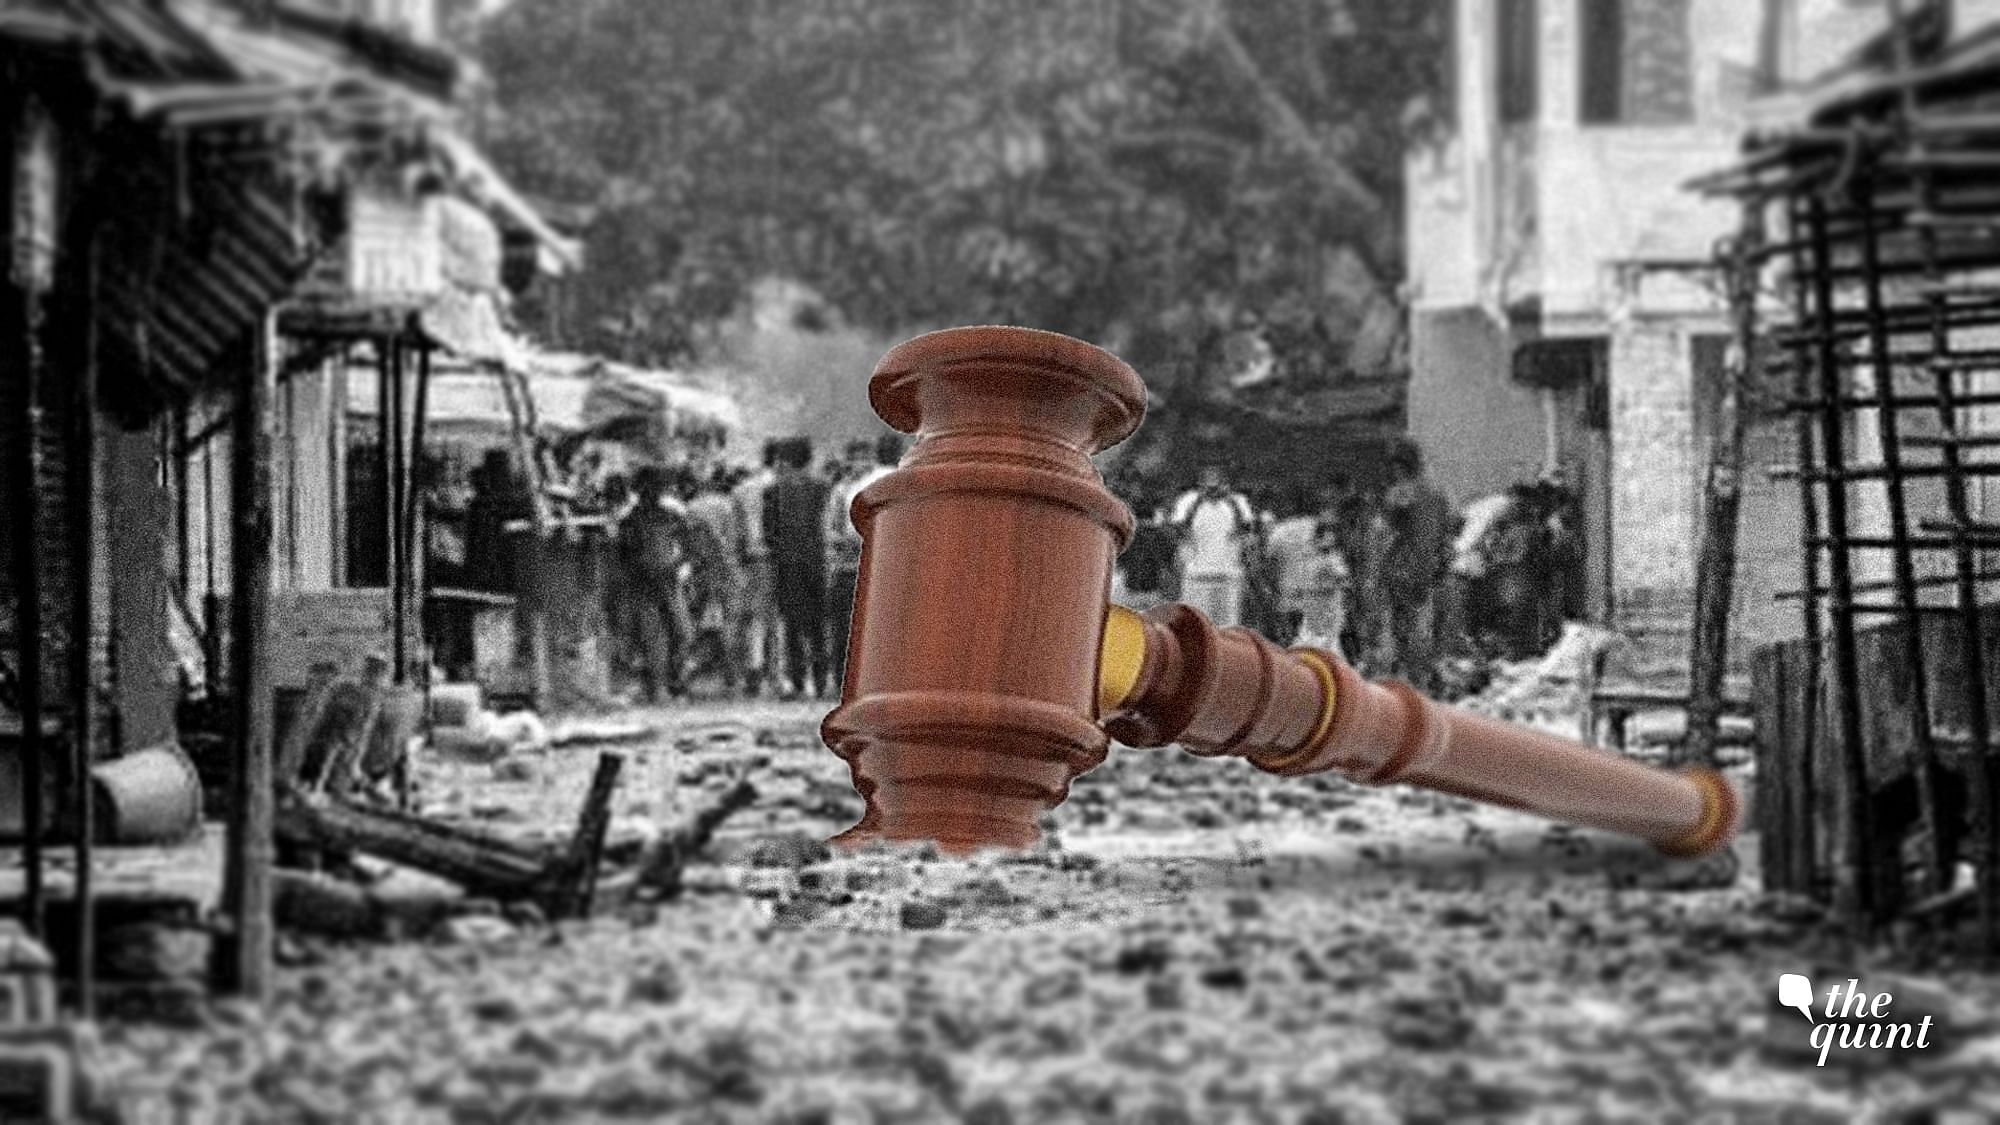 <div class="paragraphs"><p>UP Government Has Withdrawn 77 Muzaffarnagar Riots Cases Without Any Reason, SC Told. Image used for representational purposes.&nbsp;</p></div>